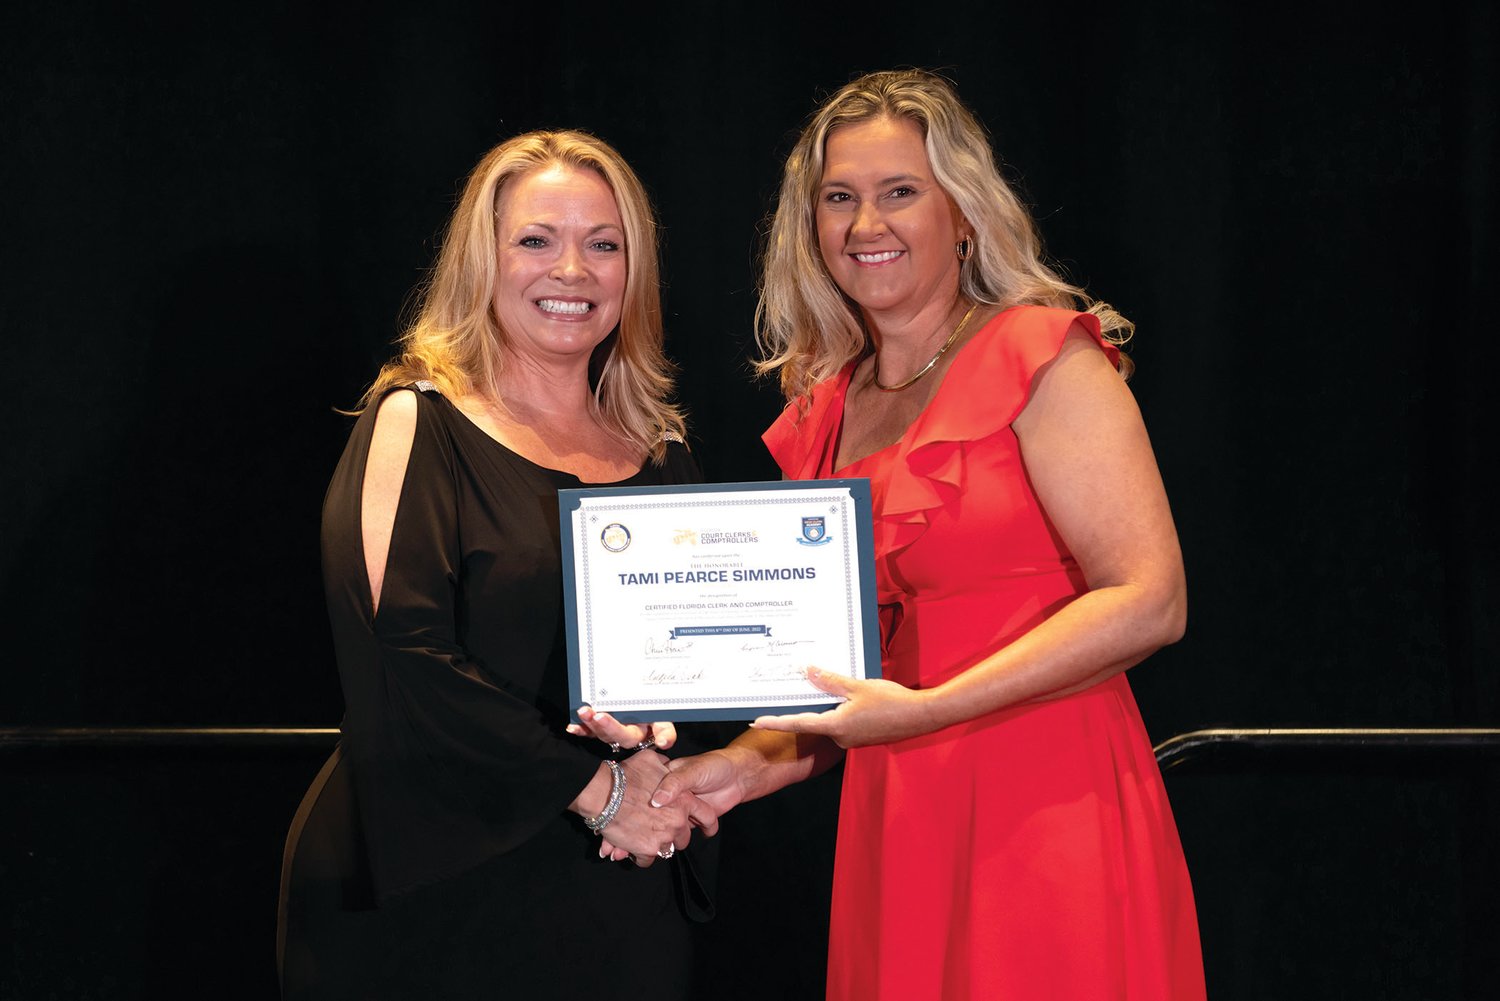 FCCC provided Tami Pearce Simmons (right) with a certificate signed by Manatee County Clerk of Court and Comptroller and 2021-2022 FCCC President Angelina “Angel” Colonneso, Esq. (left).